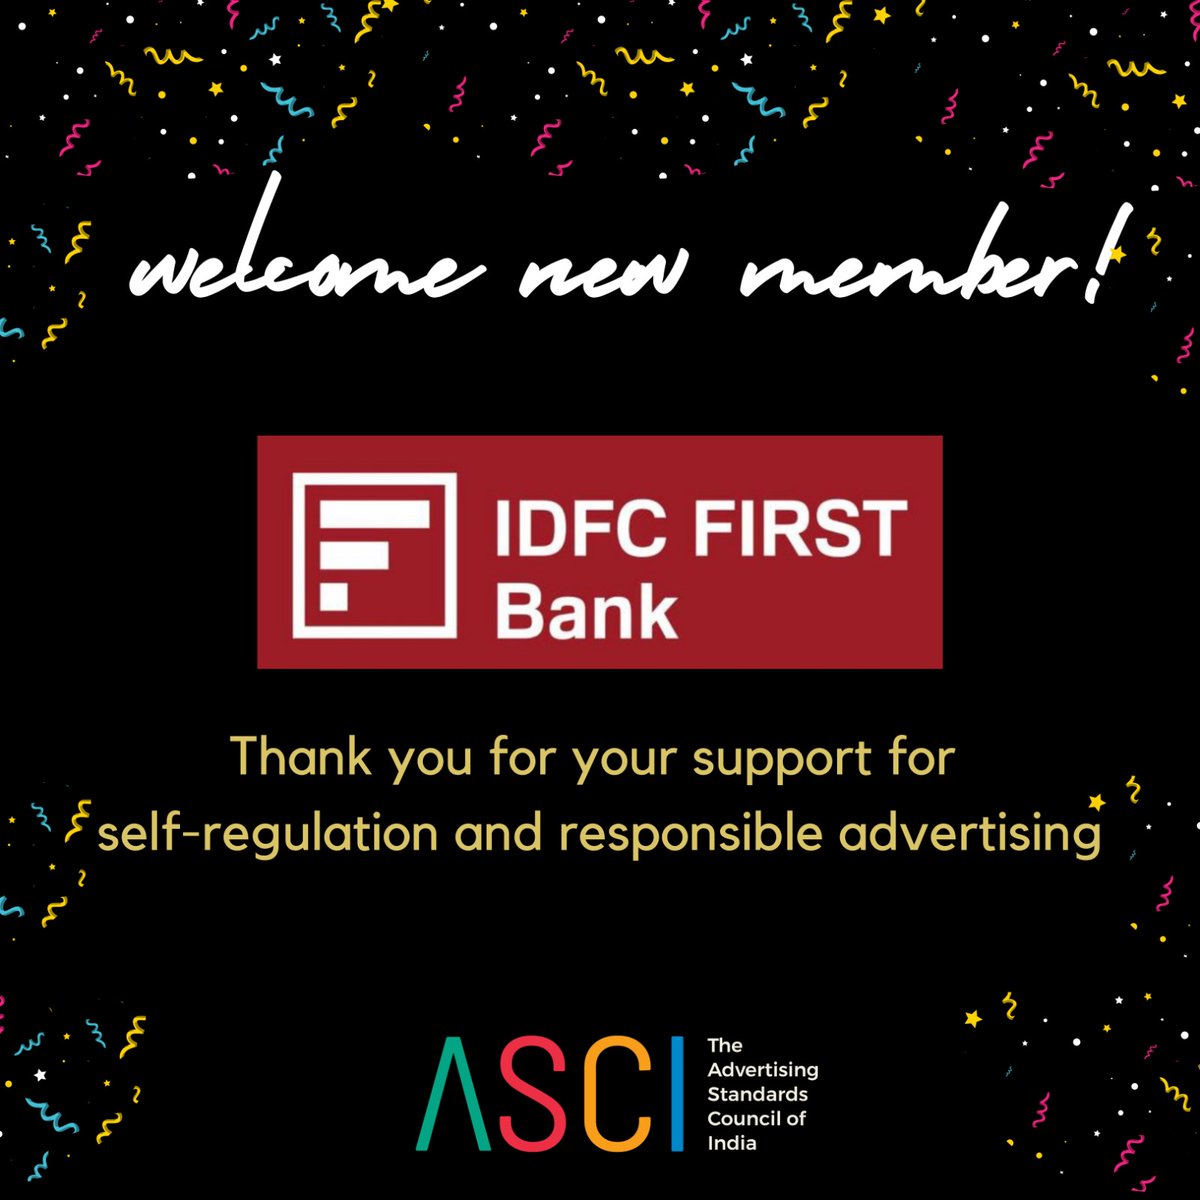 We are delighted to onboard @IDFCFIRSTBank as an ASCI member. We appreciate your support for self-regulation in advertising in India, and for committing to protect the rights of consumers. 

#ASCIMember #IDFCFirstBank #Advertising #ResponsibleAdvertising #Marketing #Regulation